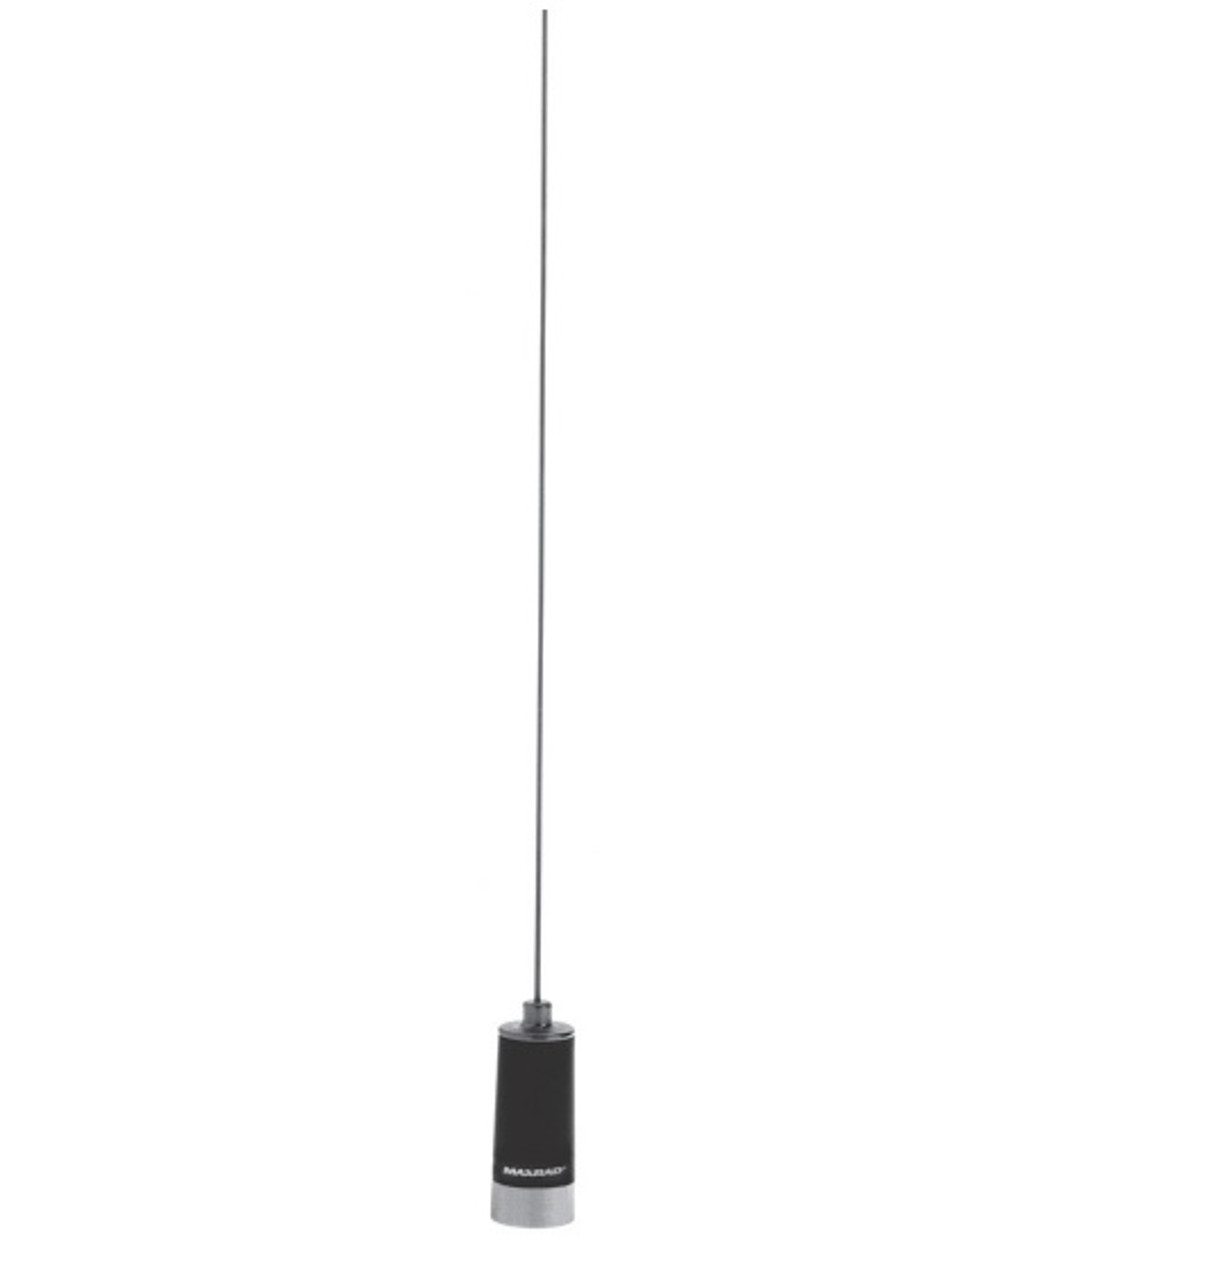 MAXRAD 30-35 MHz Low Band 1/4 wave Antenna, NMO - Rfwel Engr E-Store